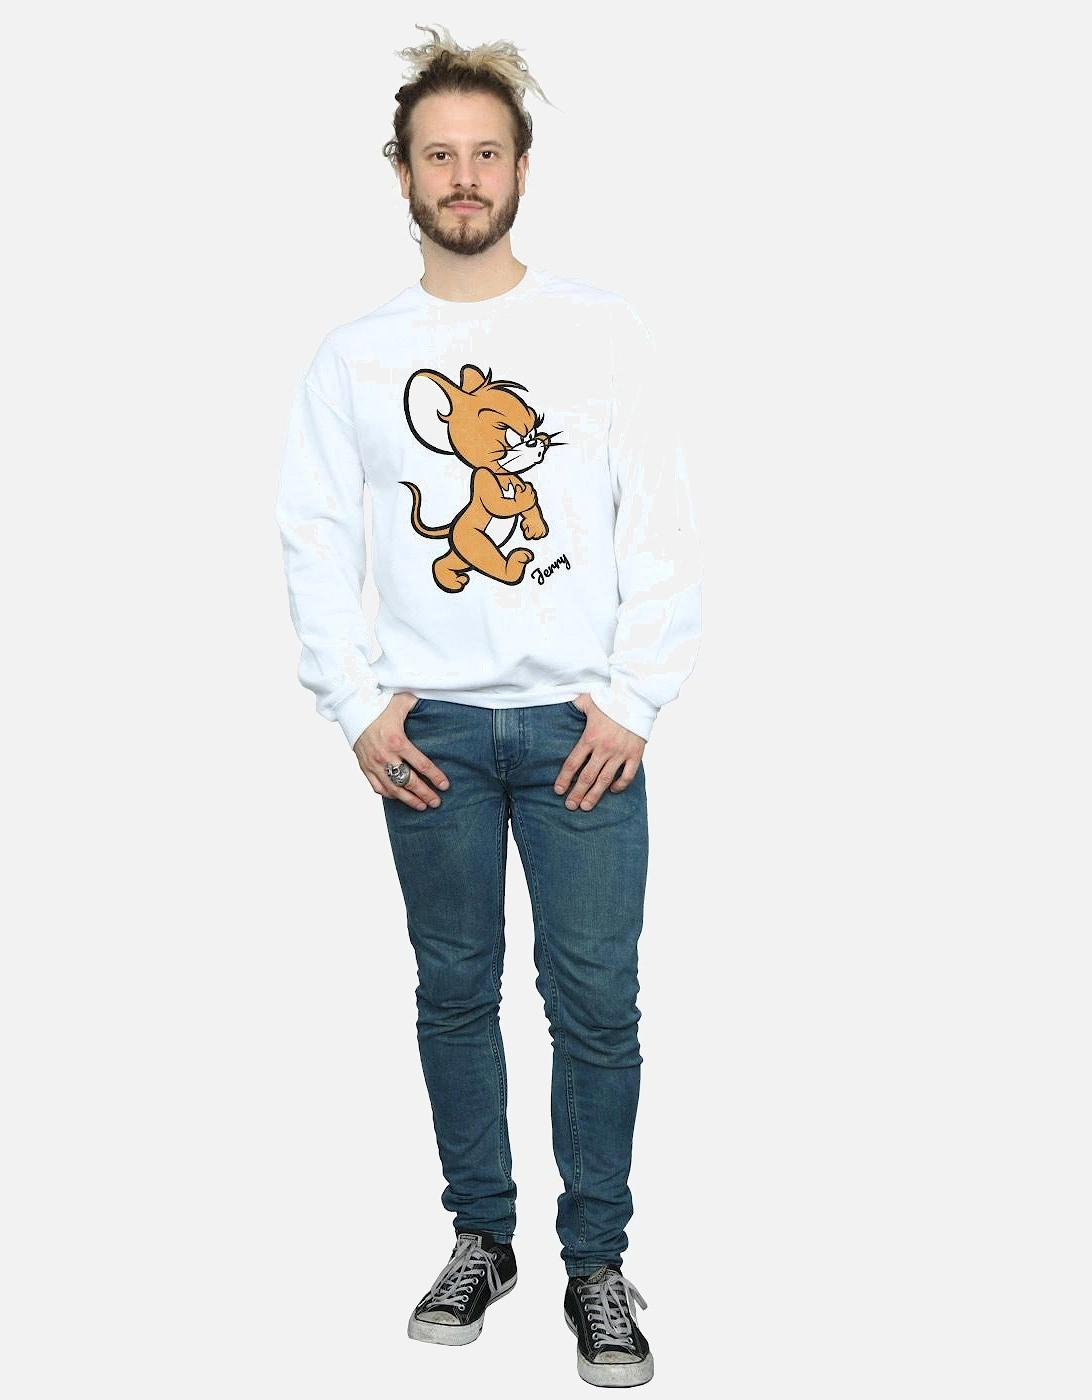 Tom and Jerry Mens Angry Mouse Cotton Sweatshirt